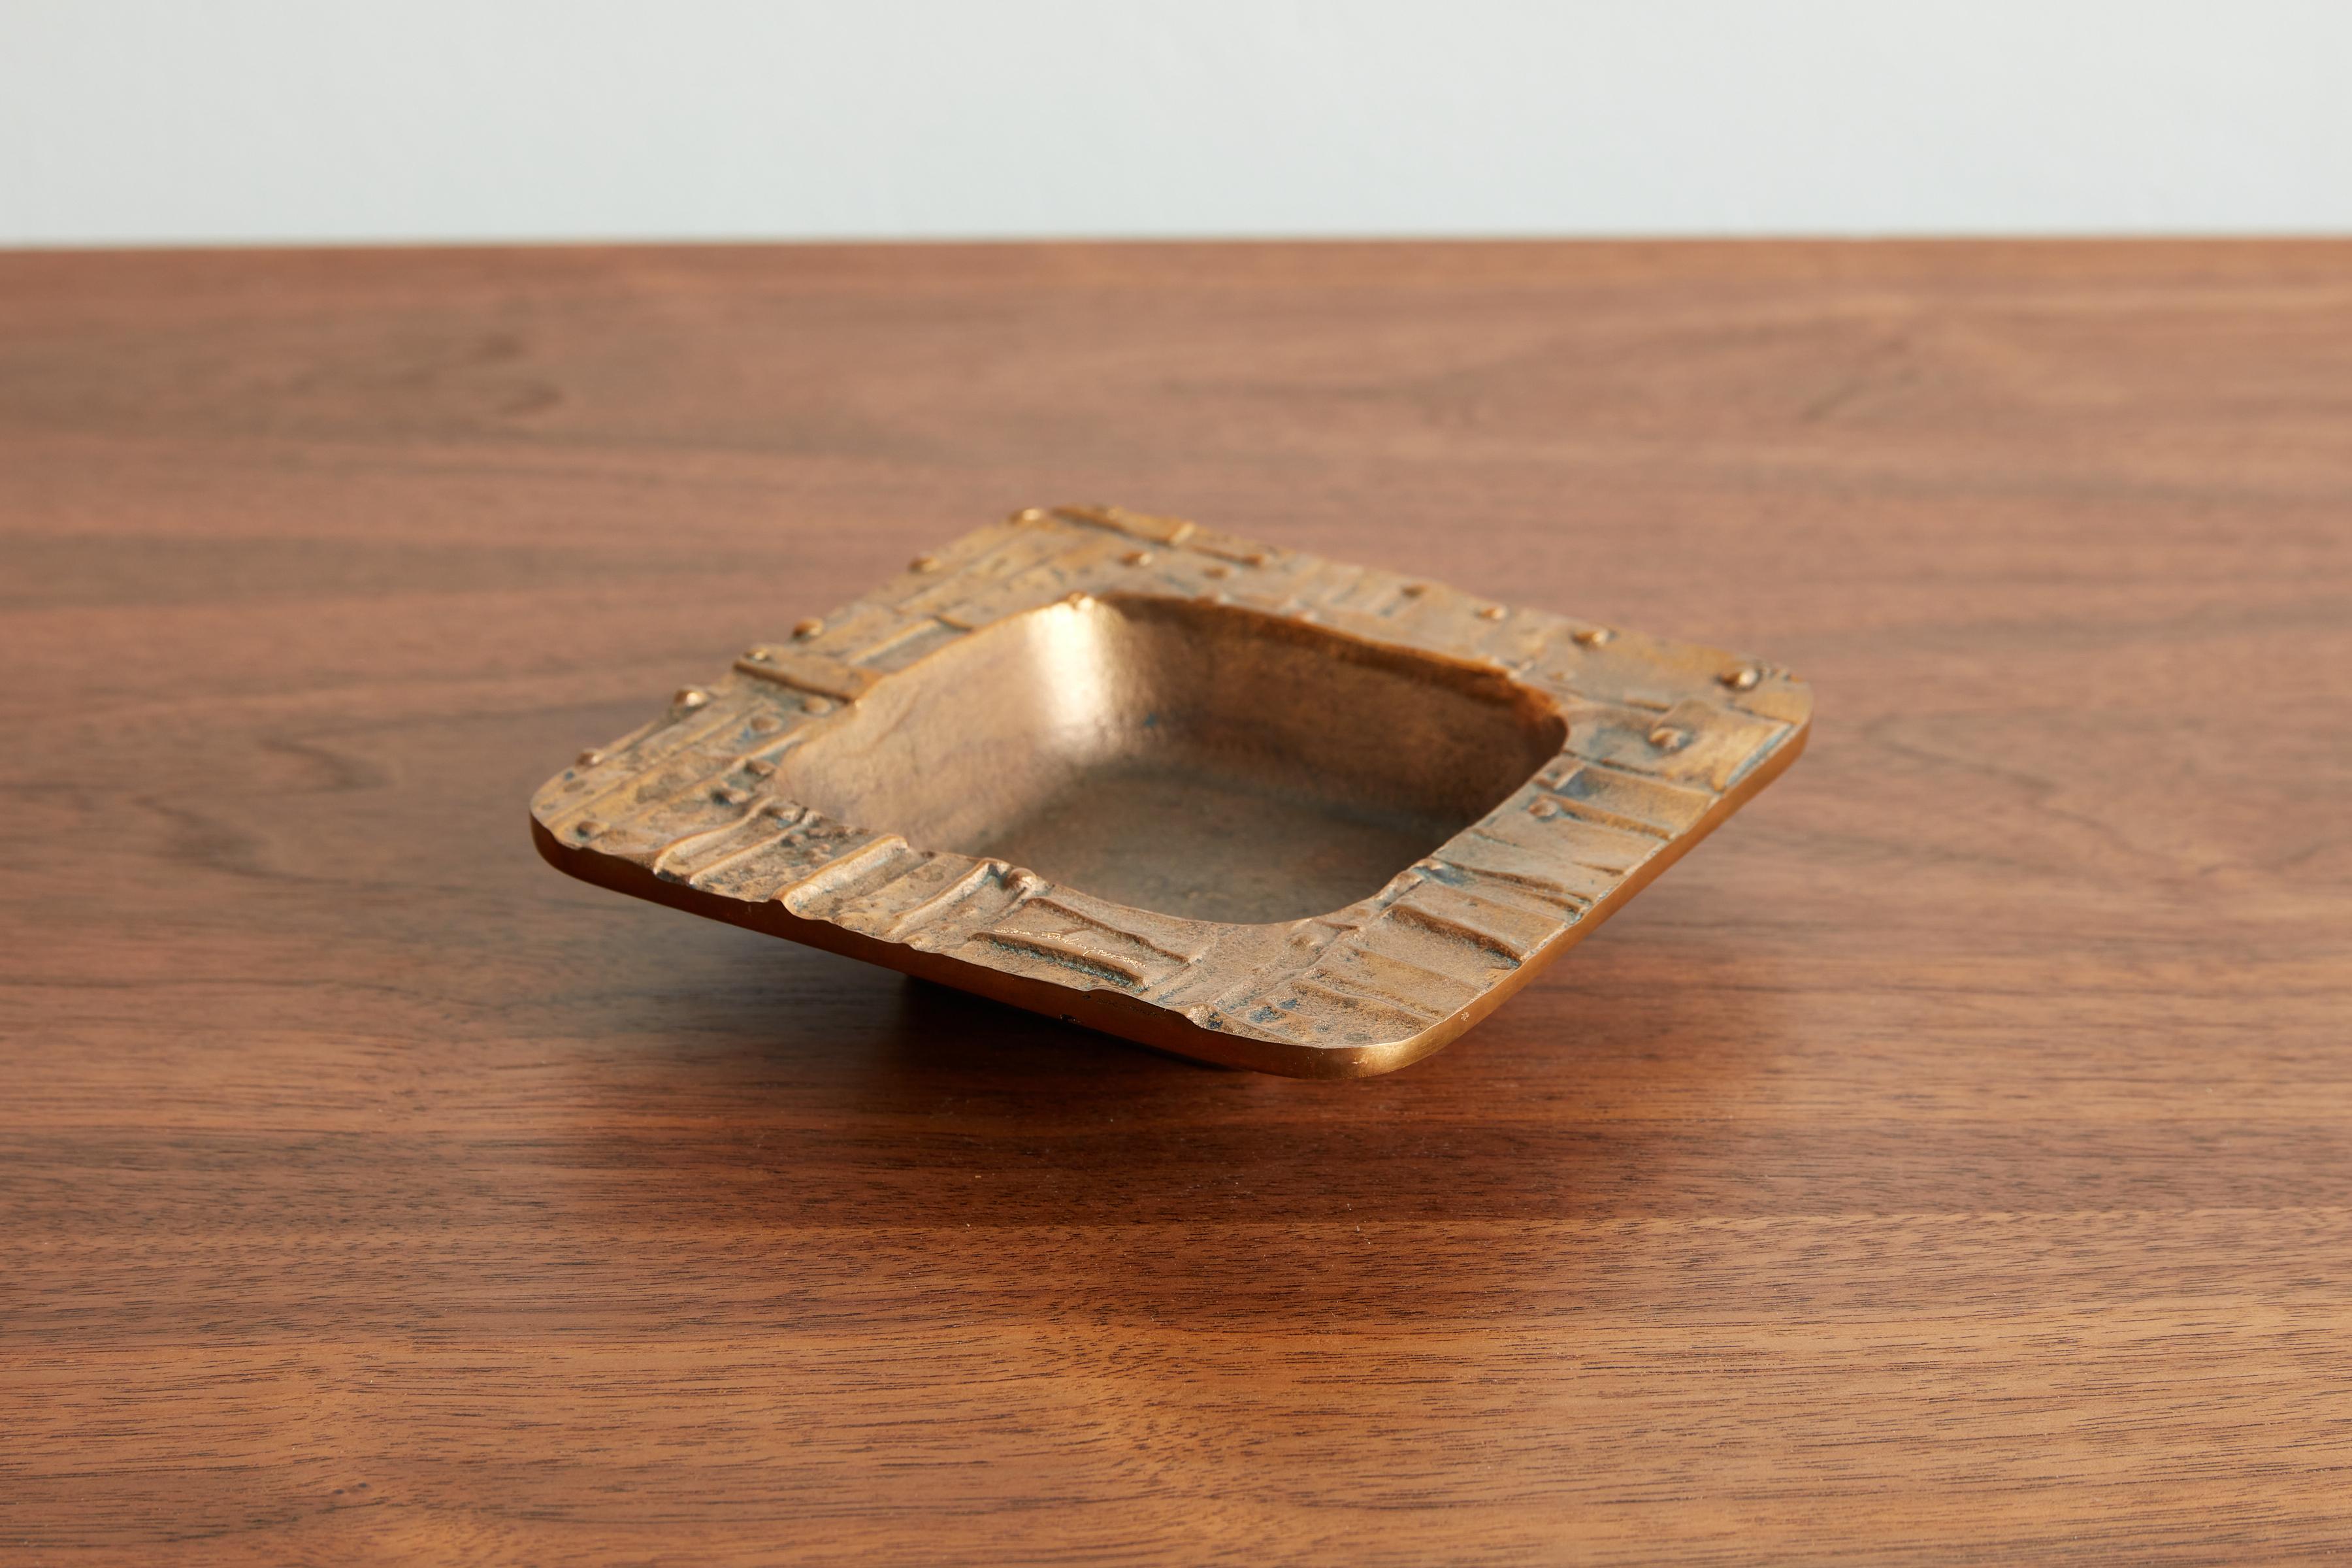 Beautiful solid bronze ashtray by Esa Fedrigolli
Signed - with cast brutalist design surrounding the edges 